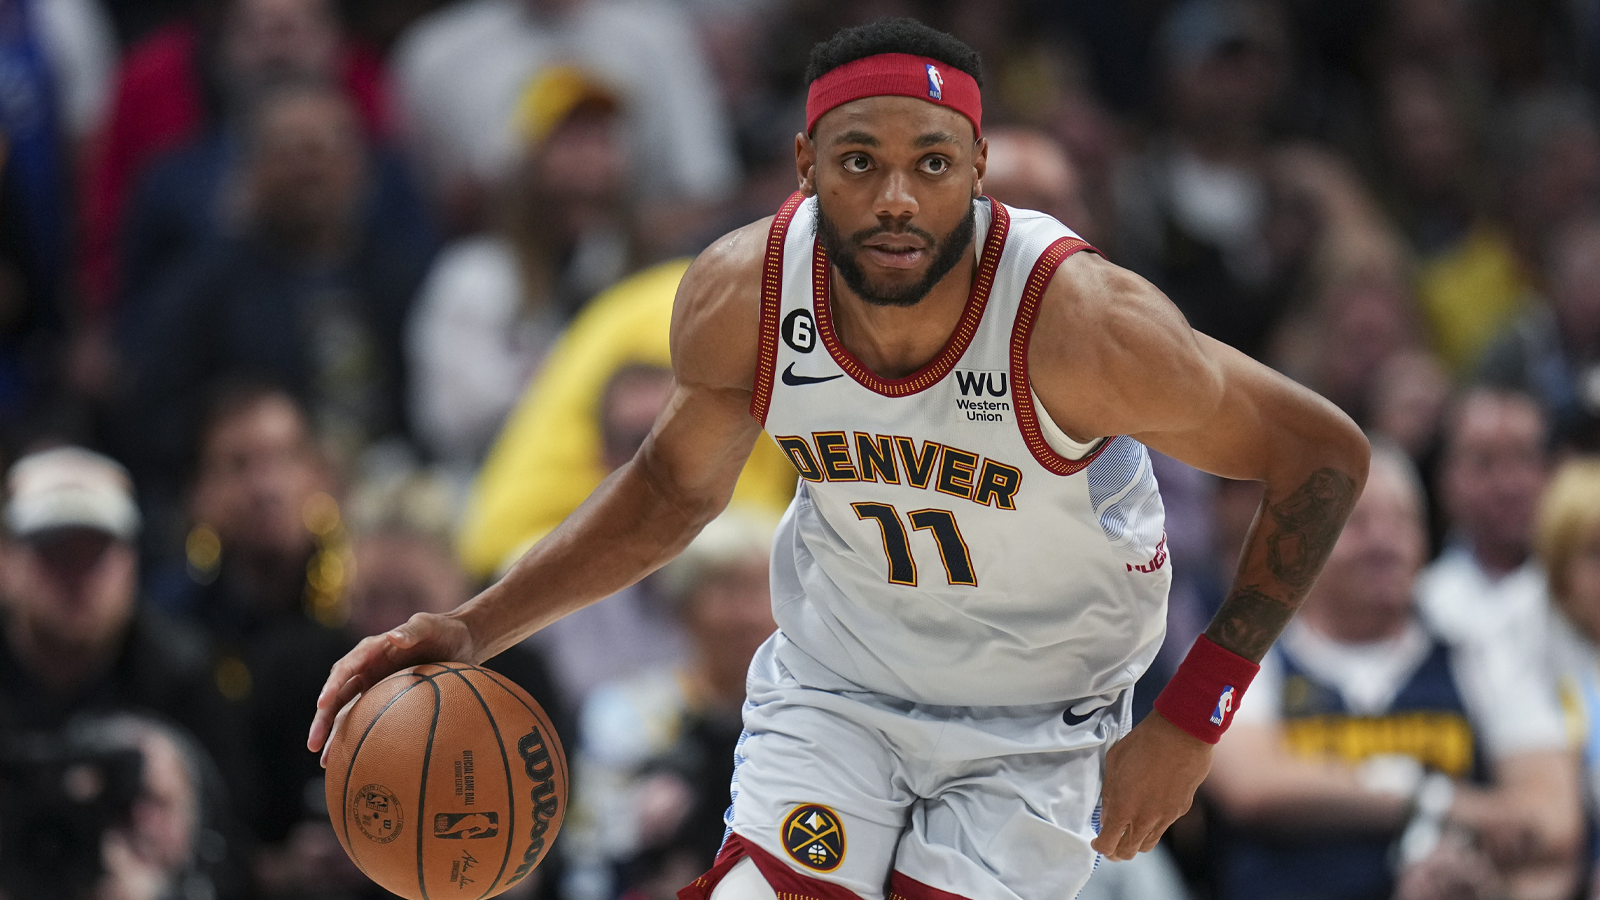 Western Union, Denver Nuggets renew jersey sponsorship for 3 yrs